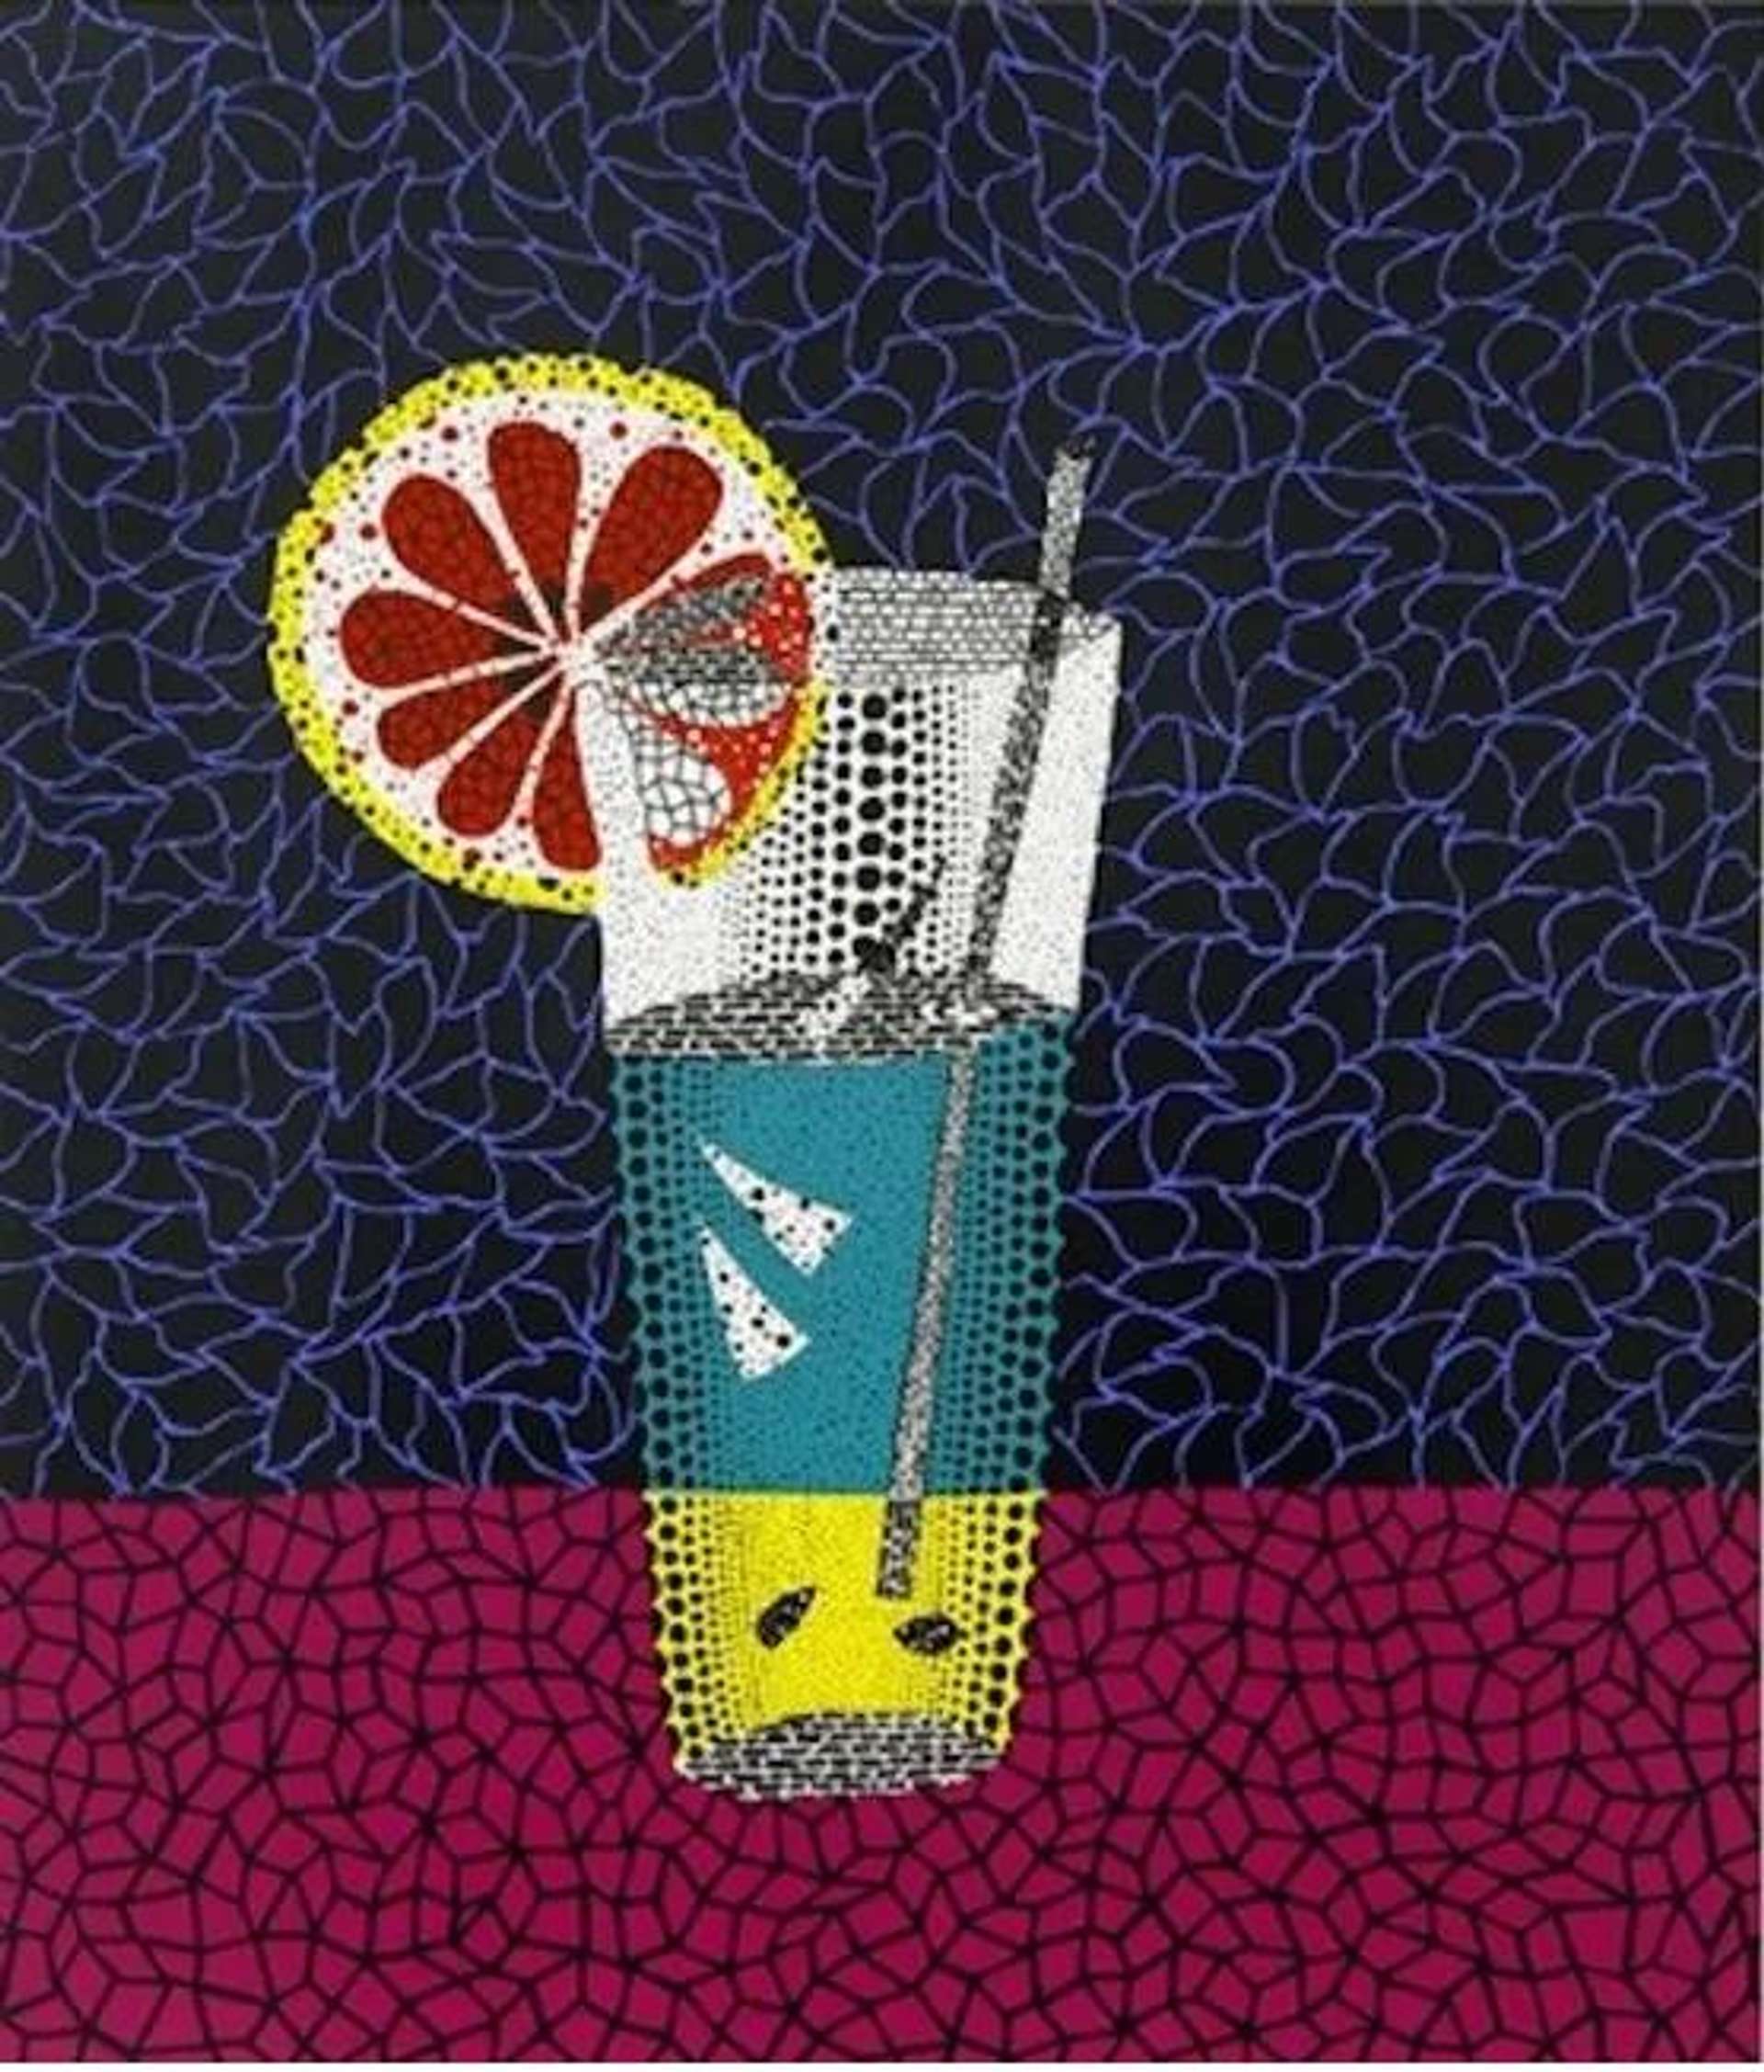 Yayoi Kusama’s Lemon Squash. A screenprint of a drink in a tall glass with a slice of lemon and straw made of a pattern of black, white, blue, yellow, and red polka dots. 